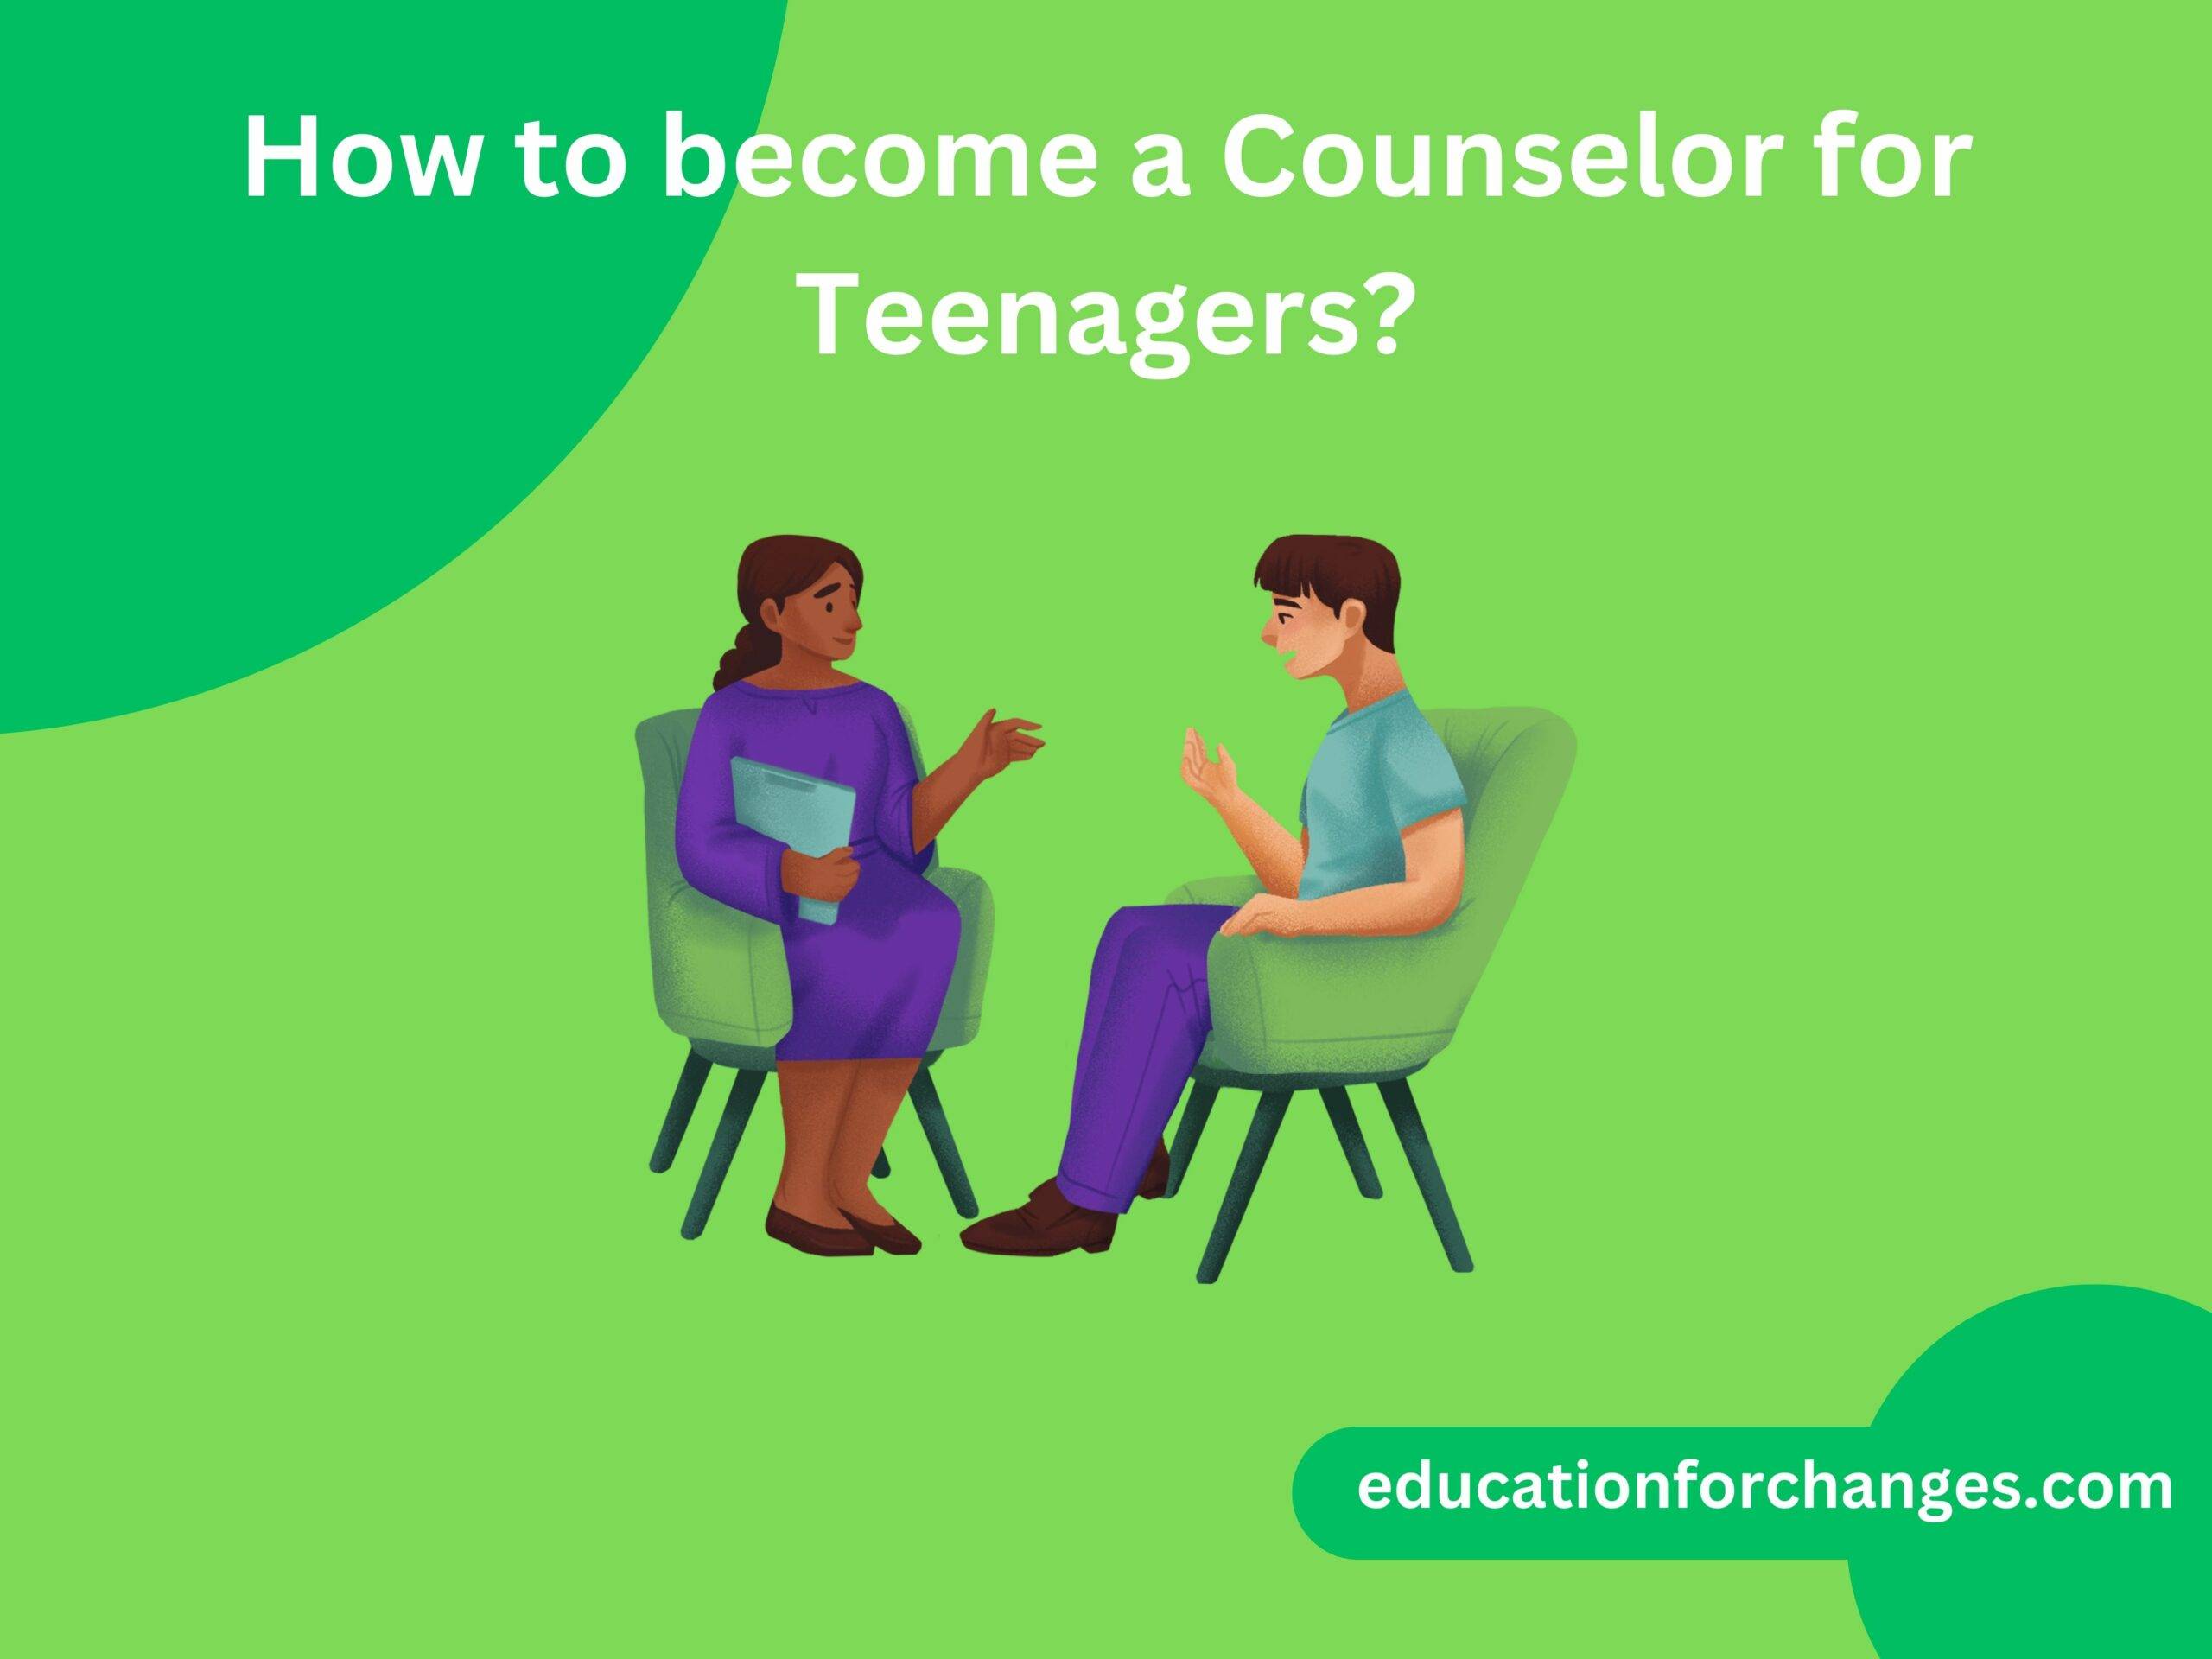 How to become a Counselor for Teenagers?